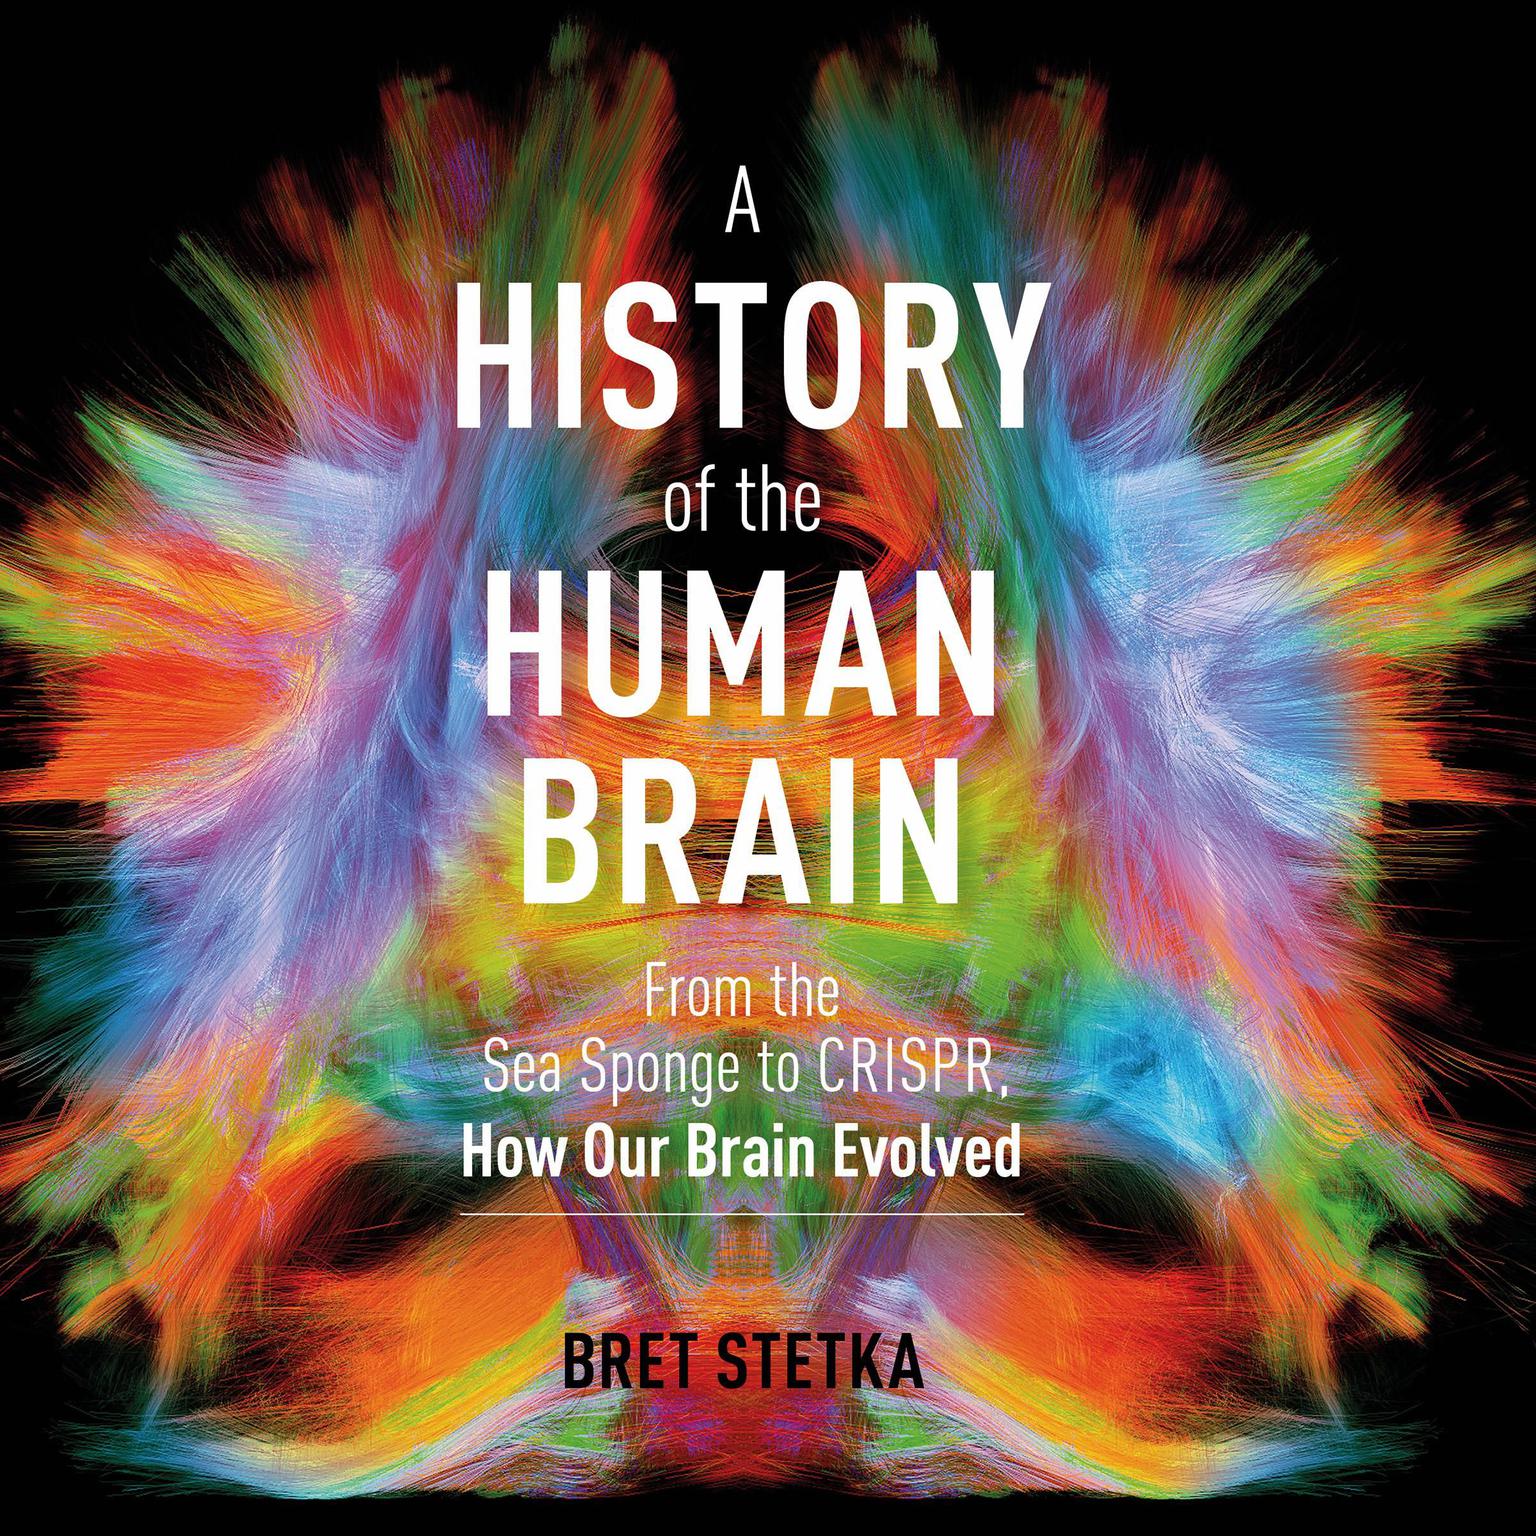 A History of the Human Brain: From the Sea Sponge to CRISPR, How Our Brain Evolved Audiobook, by Bret Stetka